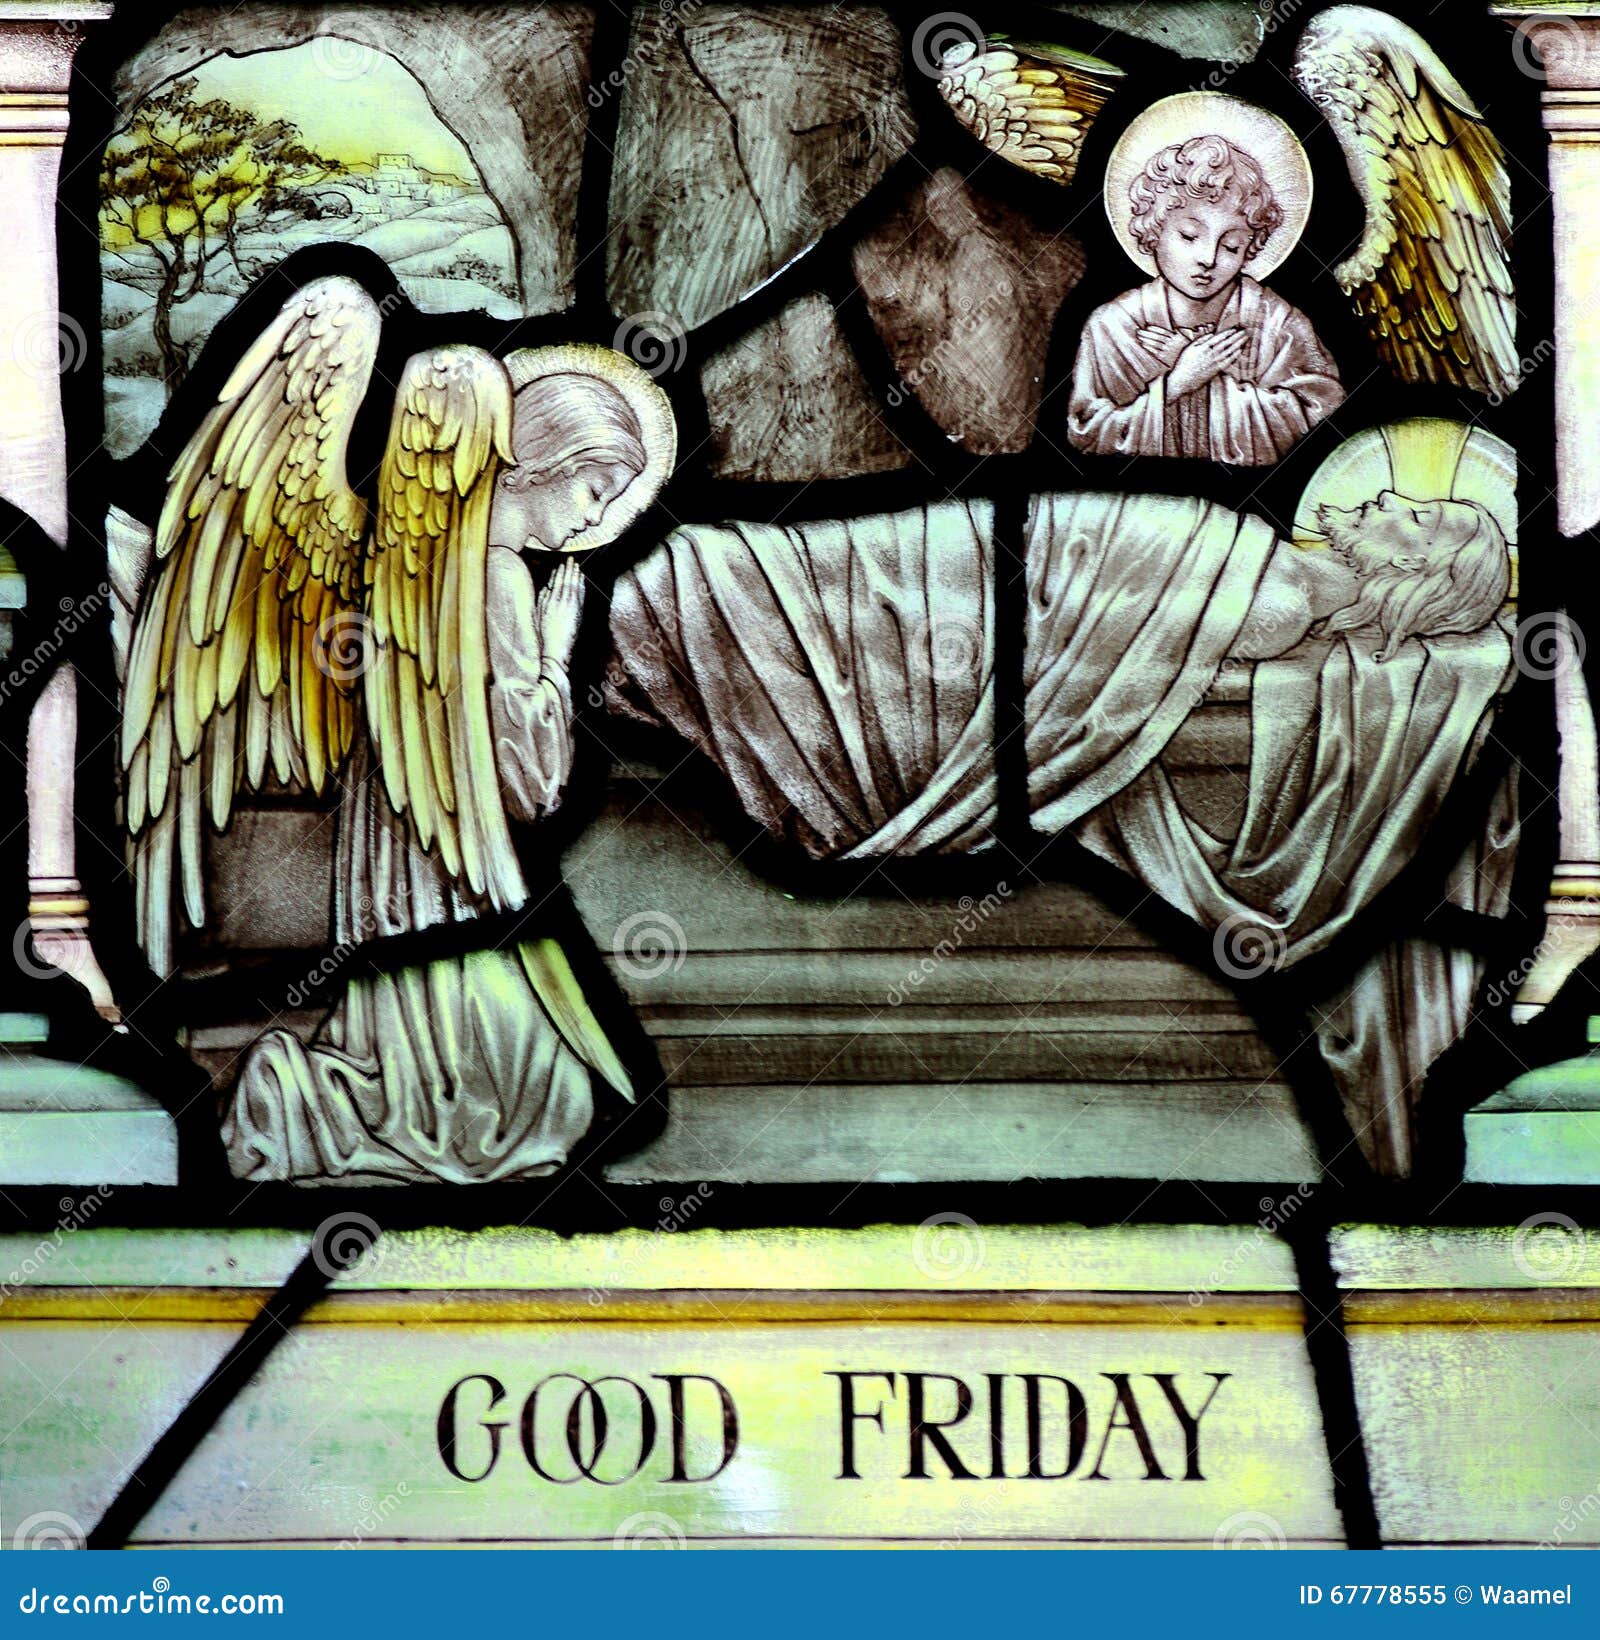 good friday in stained glass (jesus christ crucified)